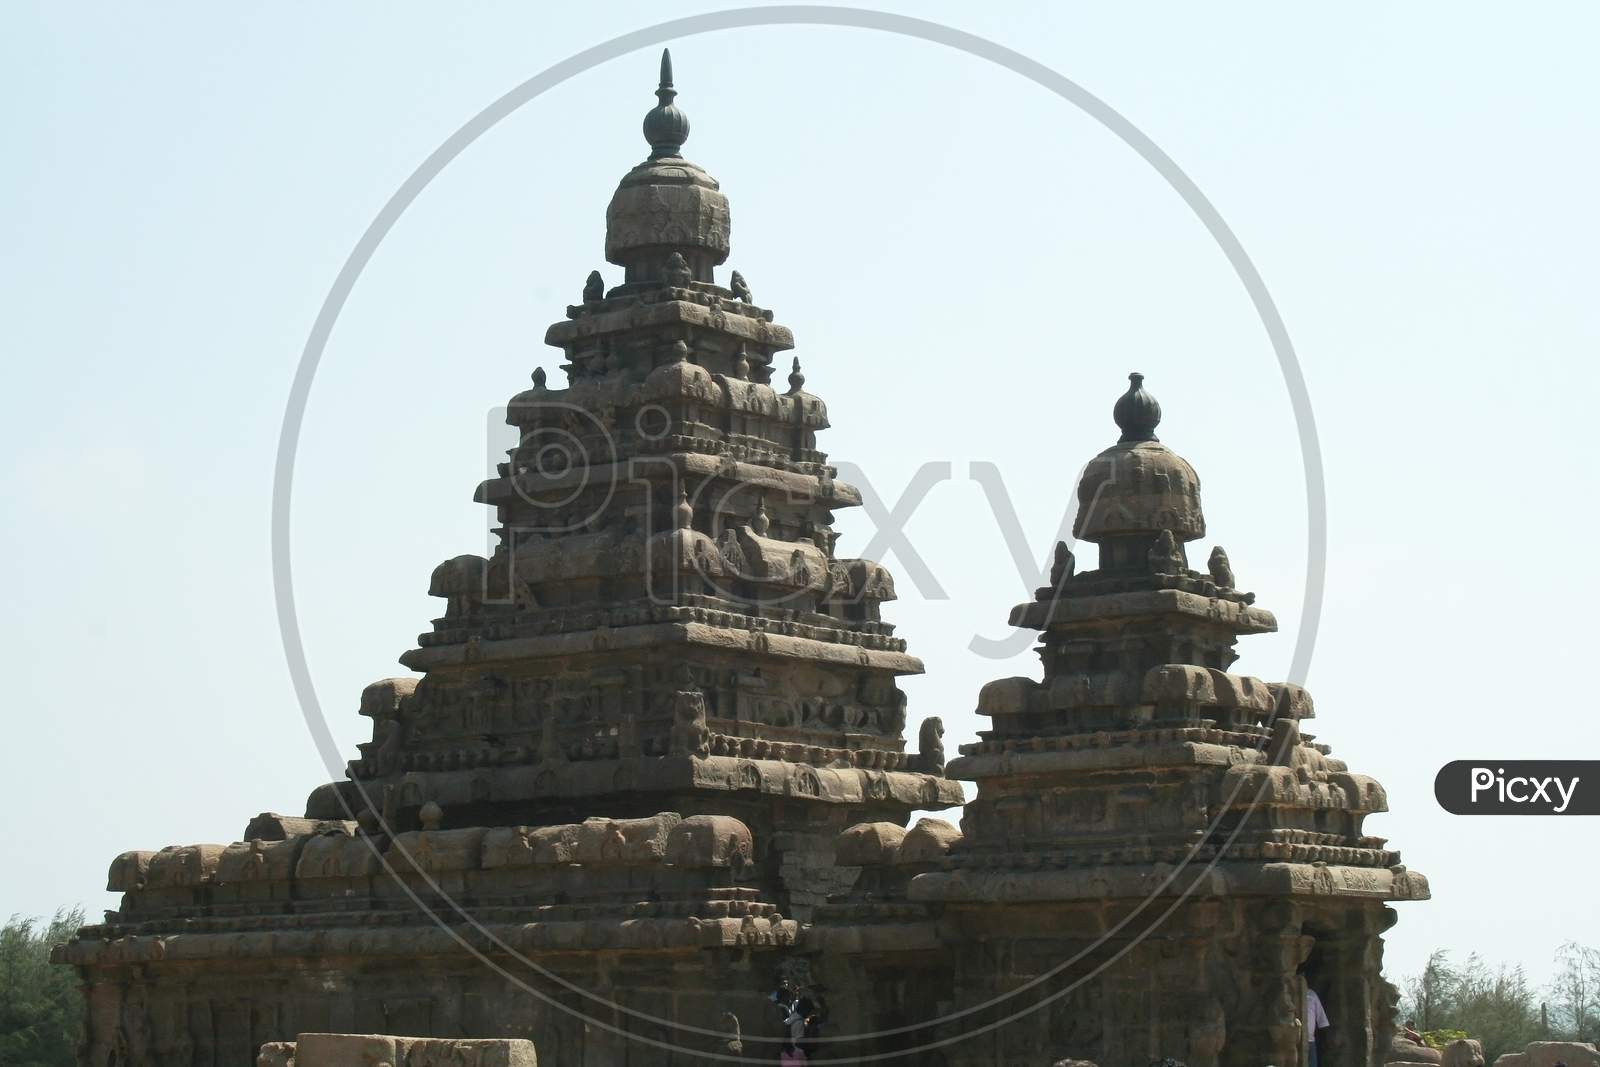 Ancient temples of  Mahabalipuram, built by the Pallava dynasty in the 7th and 8th centuries.